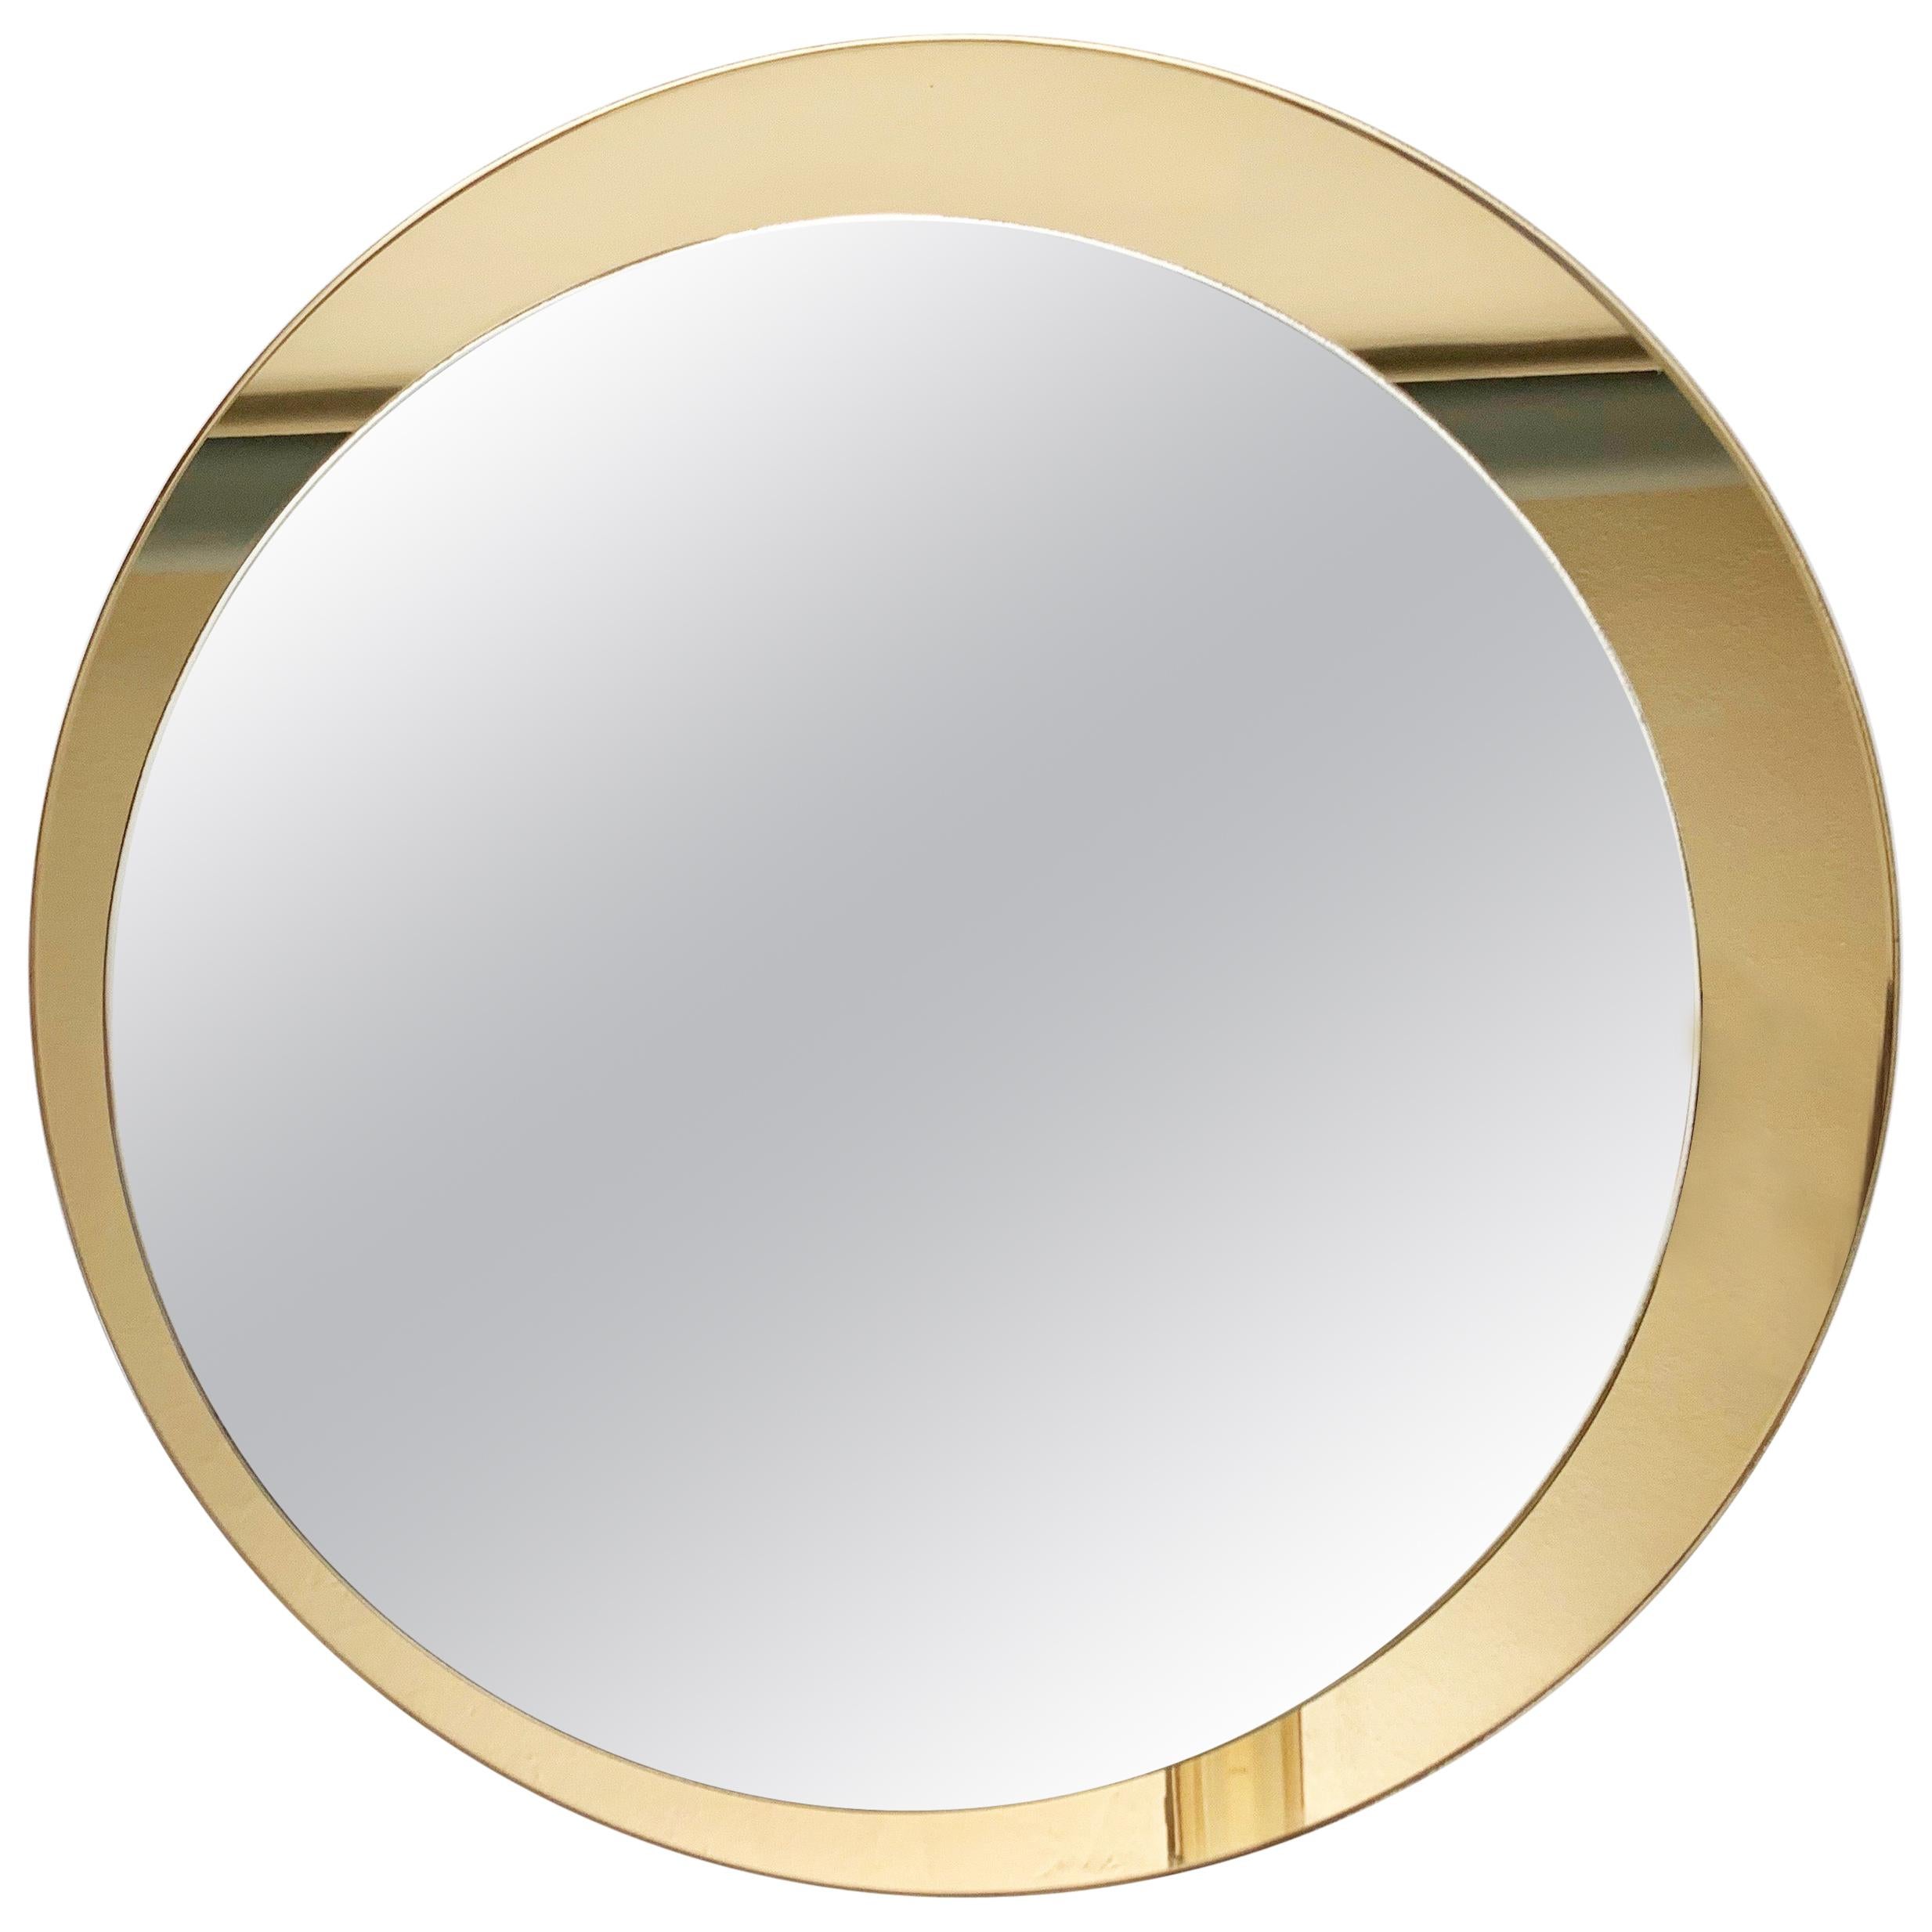 Galimberti Midcentury Italian Round Mirror with Double Brassed Gold Frame, 1975 For Sale